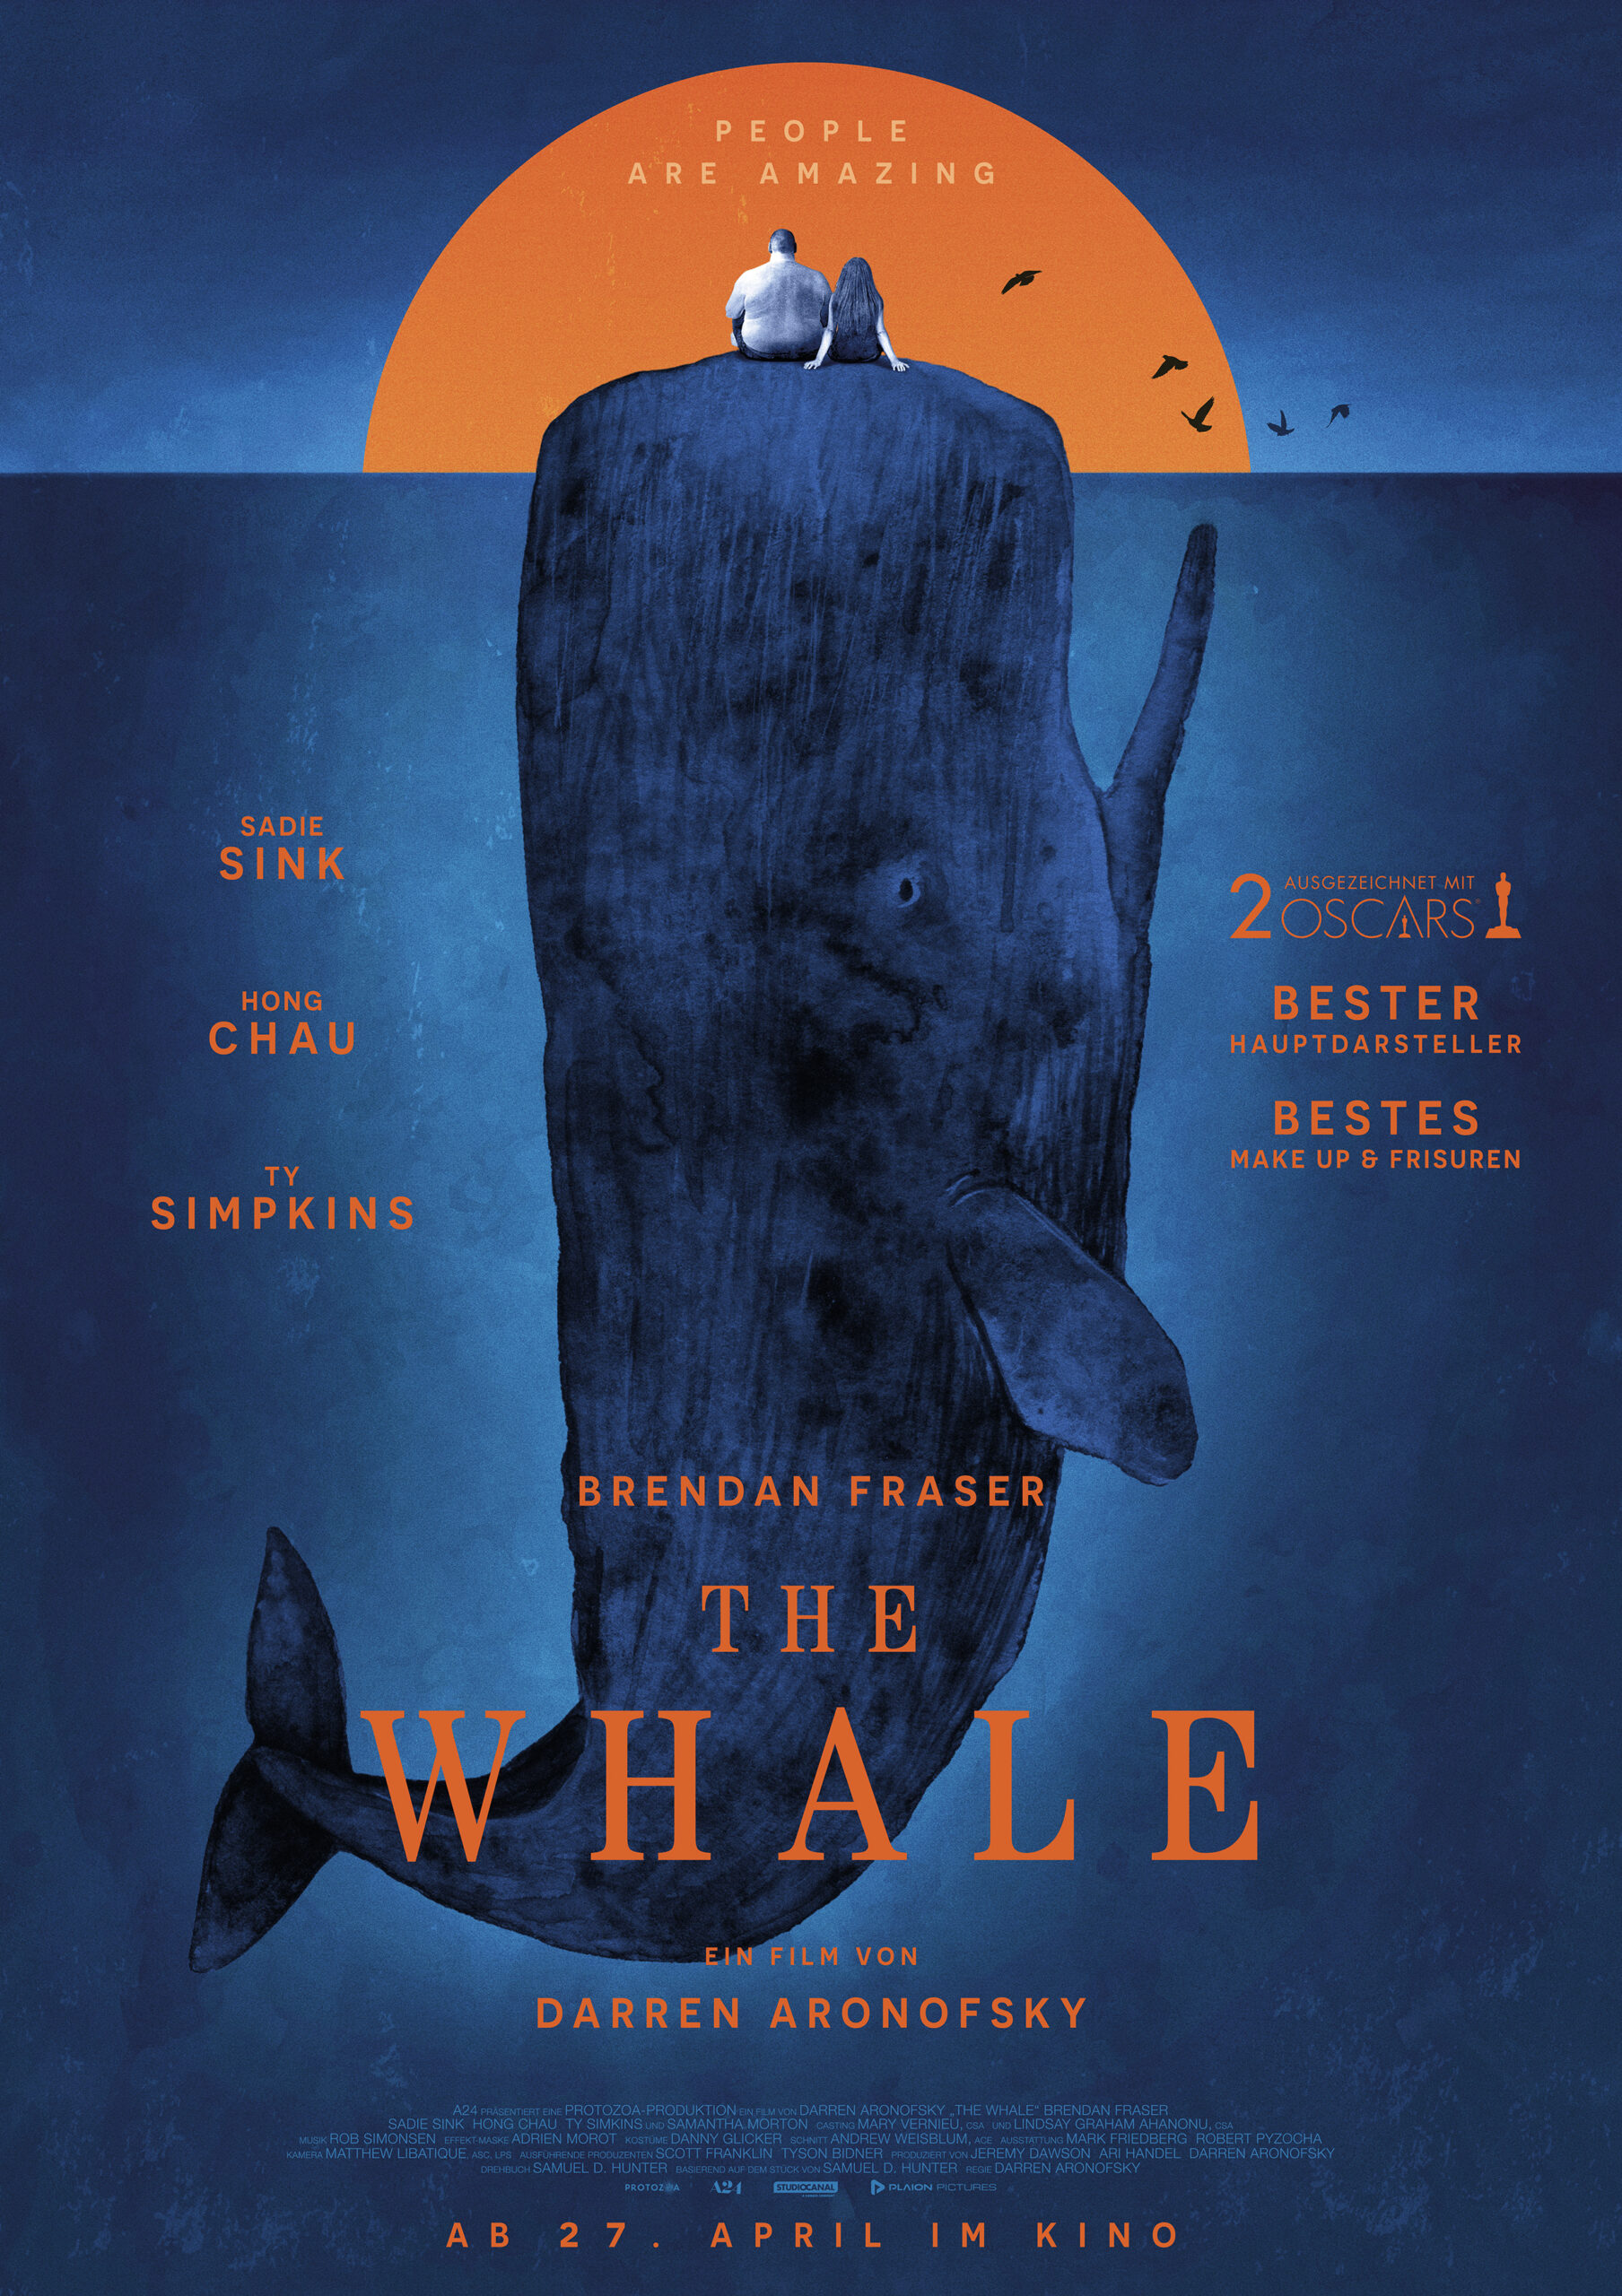 TheWhale_Plakat_A4_A24